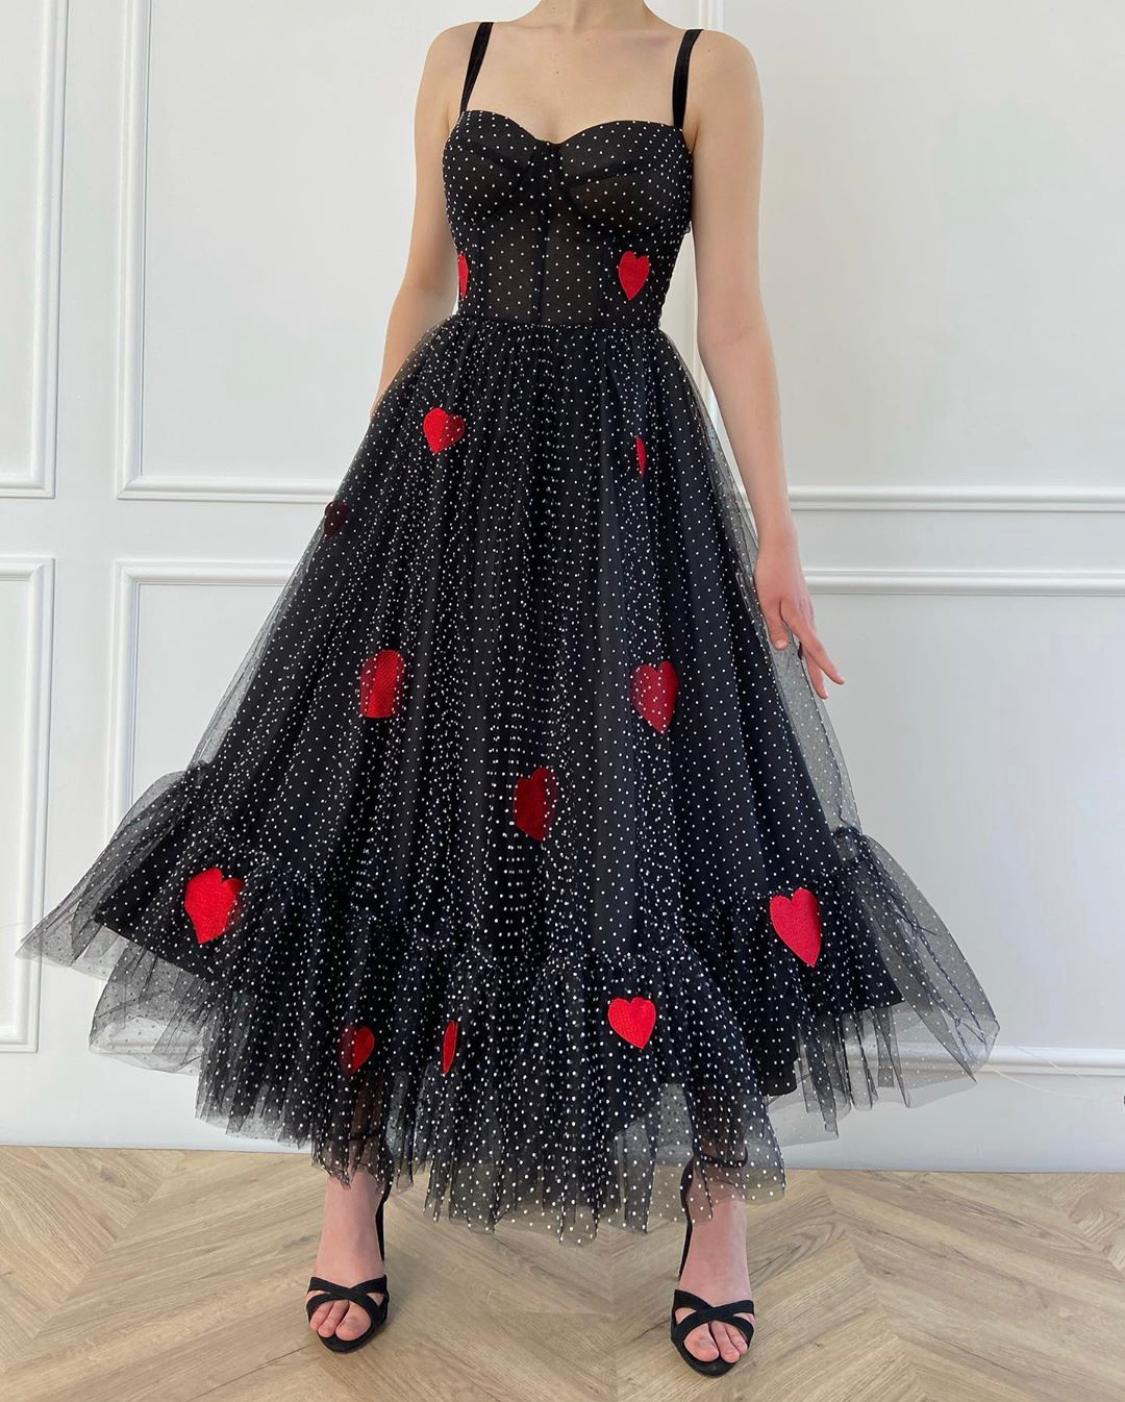 Black midi dotted dress with spaghetti straps and embroidered hearts